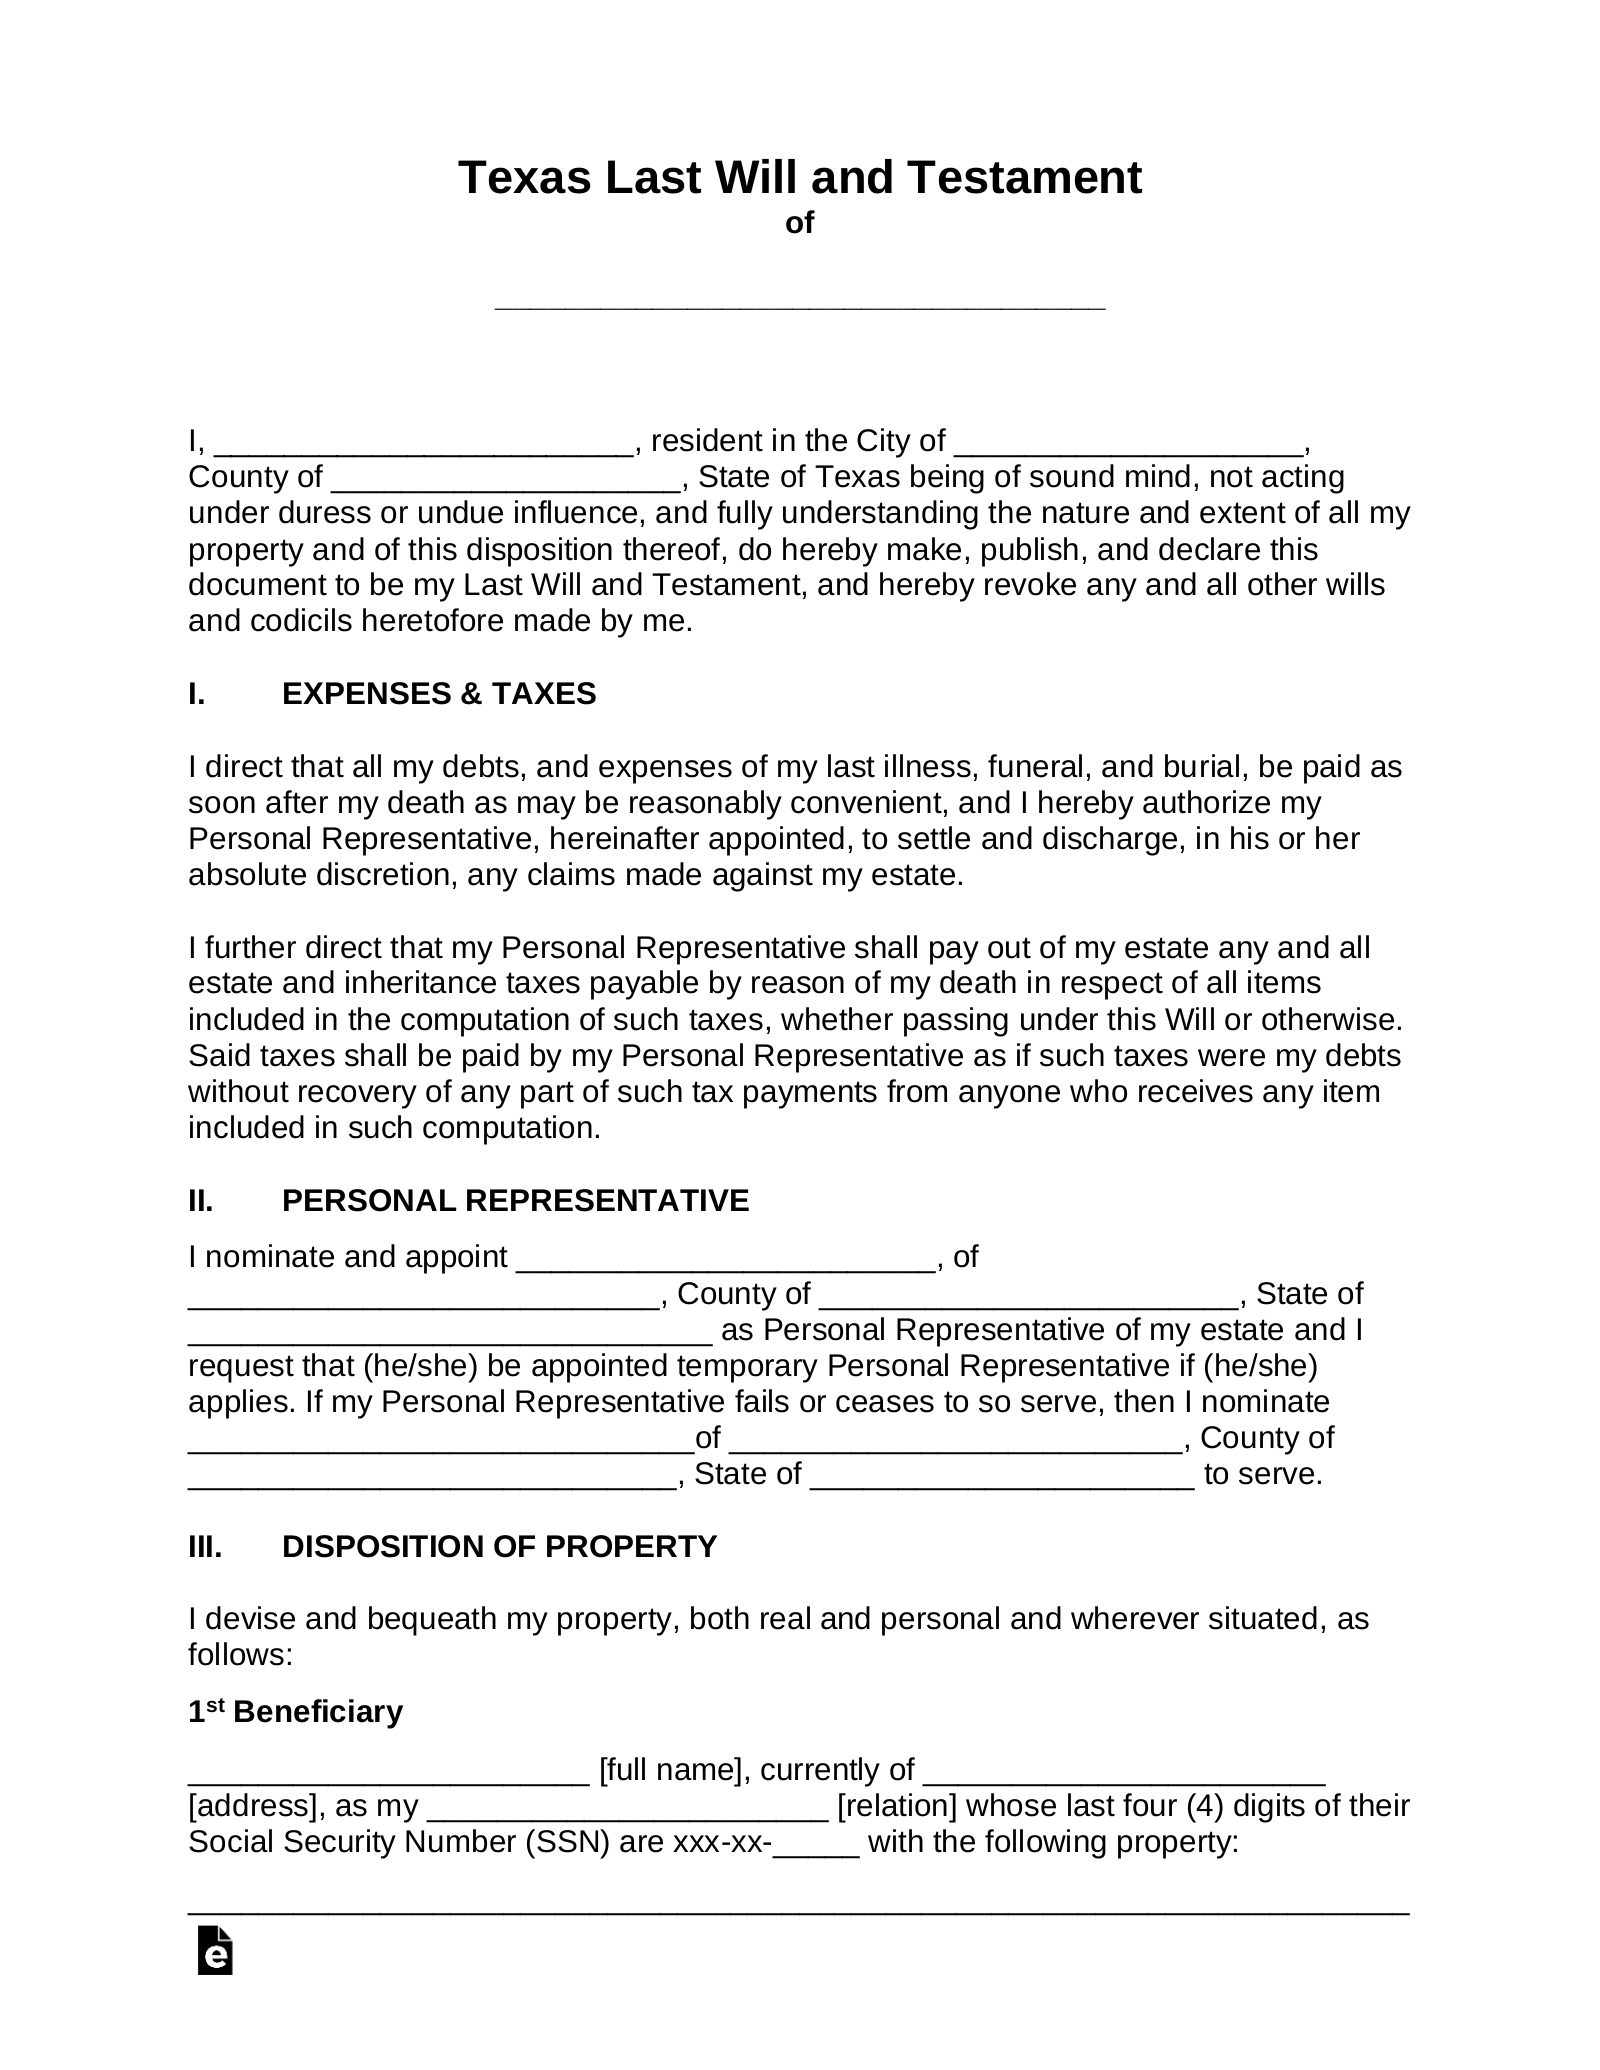 Texas Last Will and Testament Template